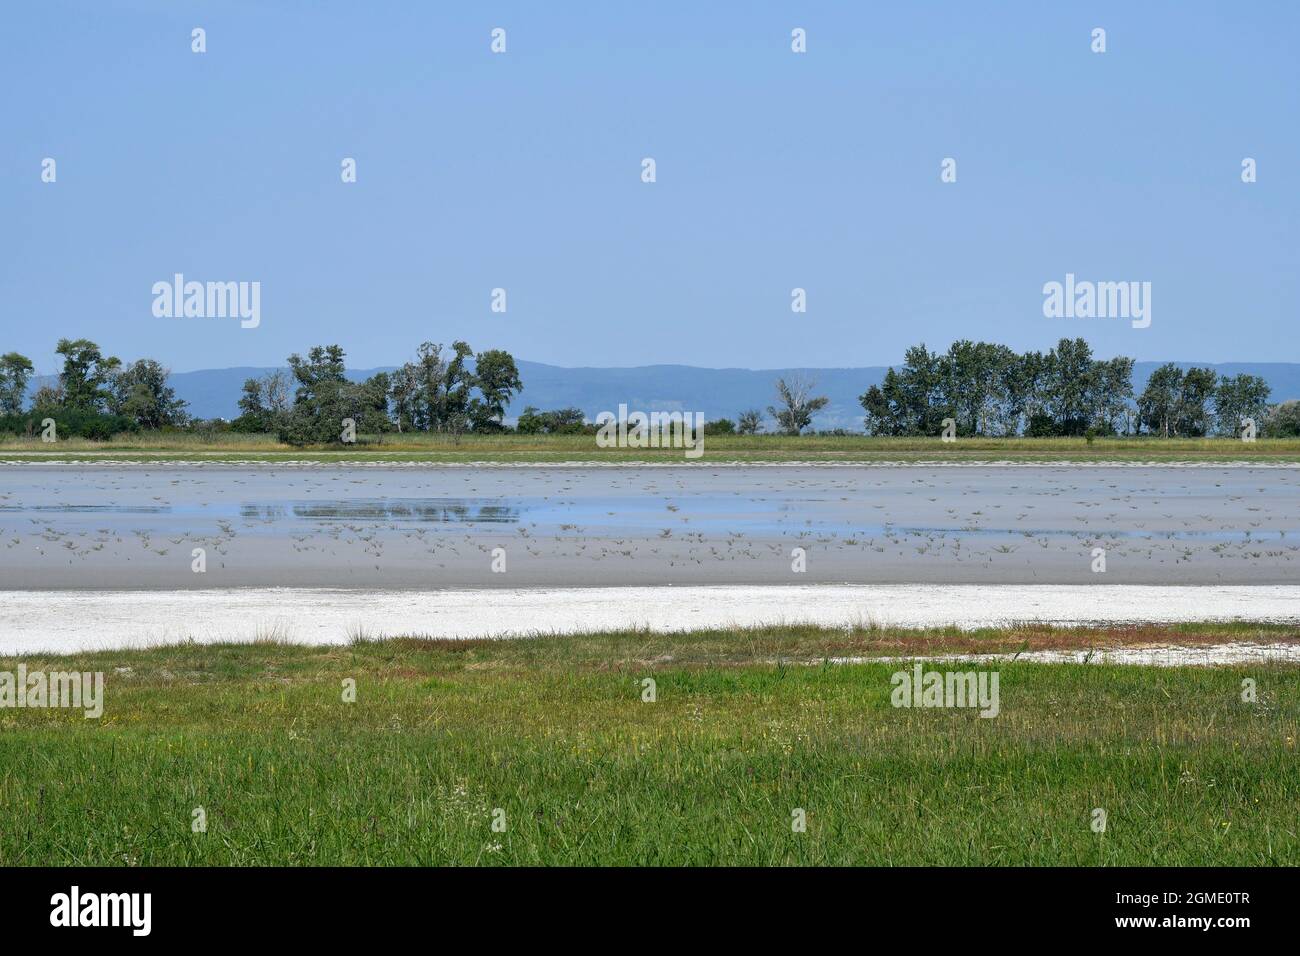 Austria, Neusiedleree-Seewinkel national park in Burgenland in the Pannonian lowlands, popular excursion destination with steppe landscape, wetlands, Stock Photo